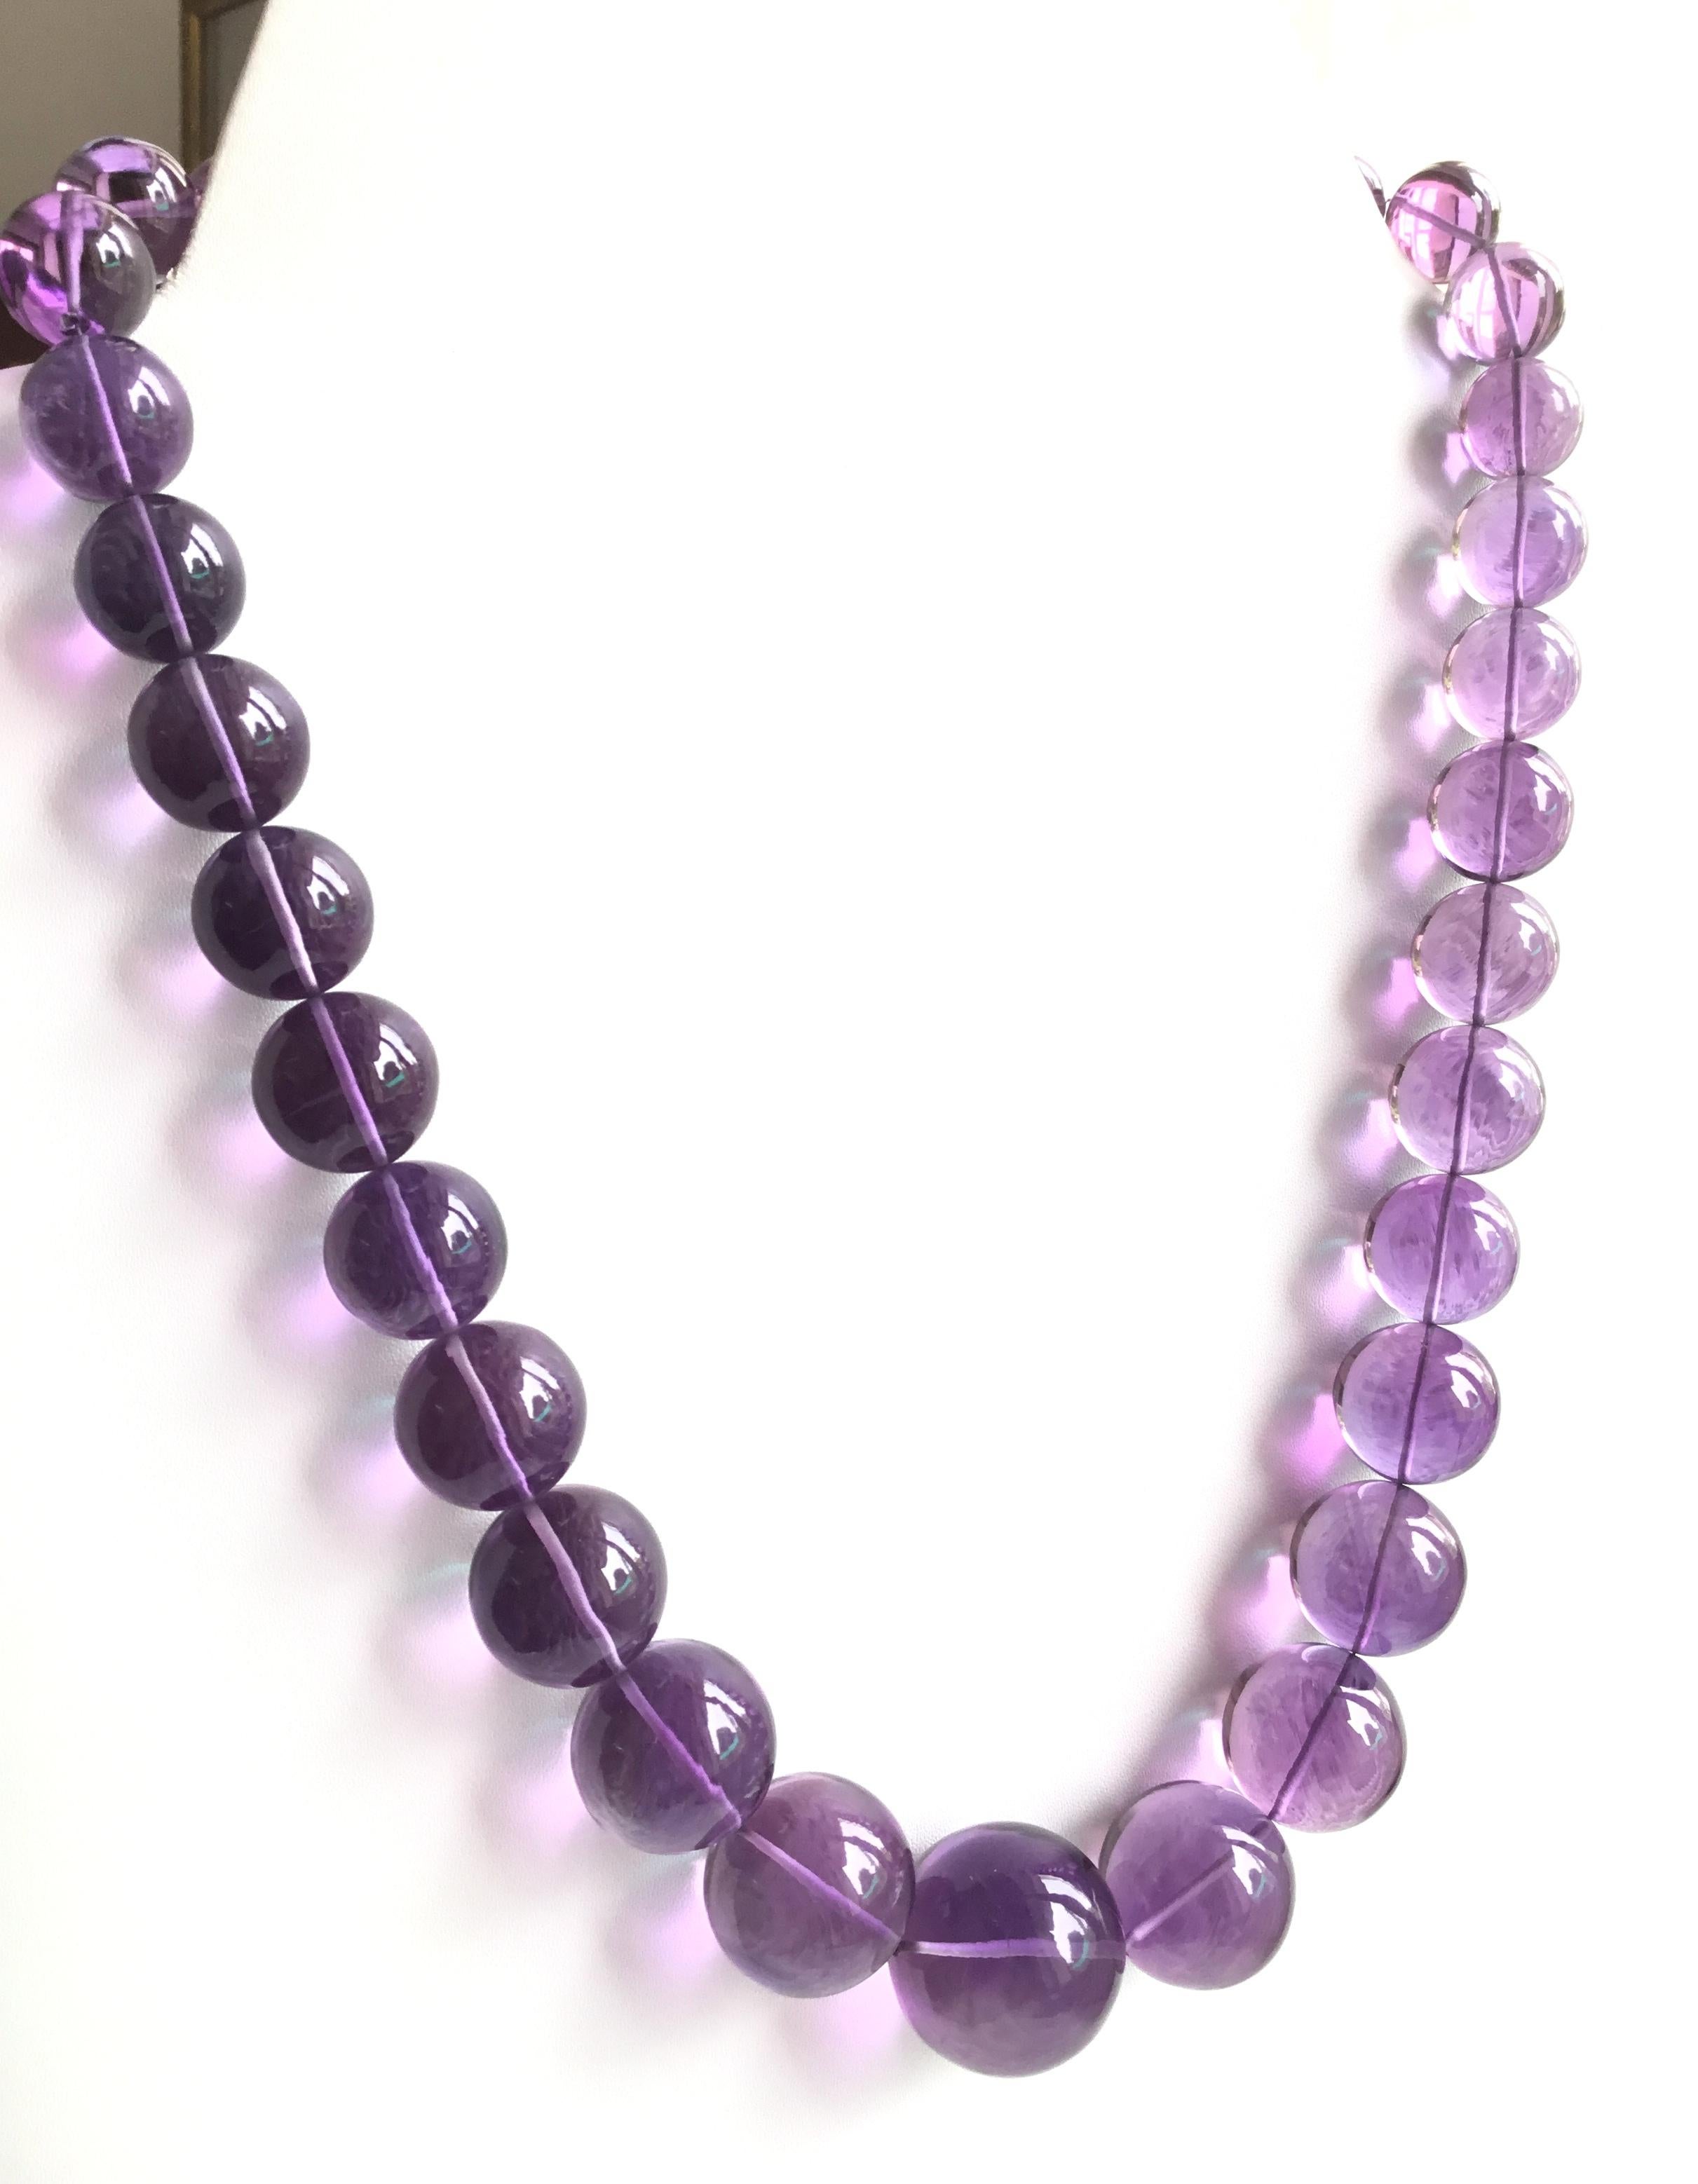 Top Quality Amethyst Balls Necklace Loupe Clean For Sale 3